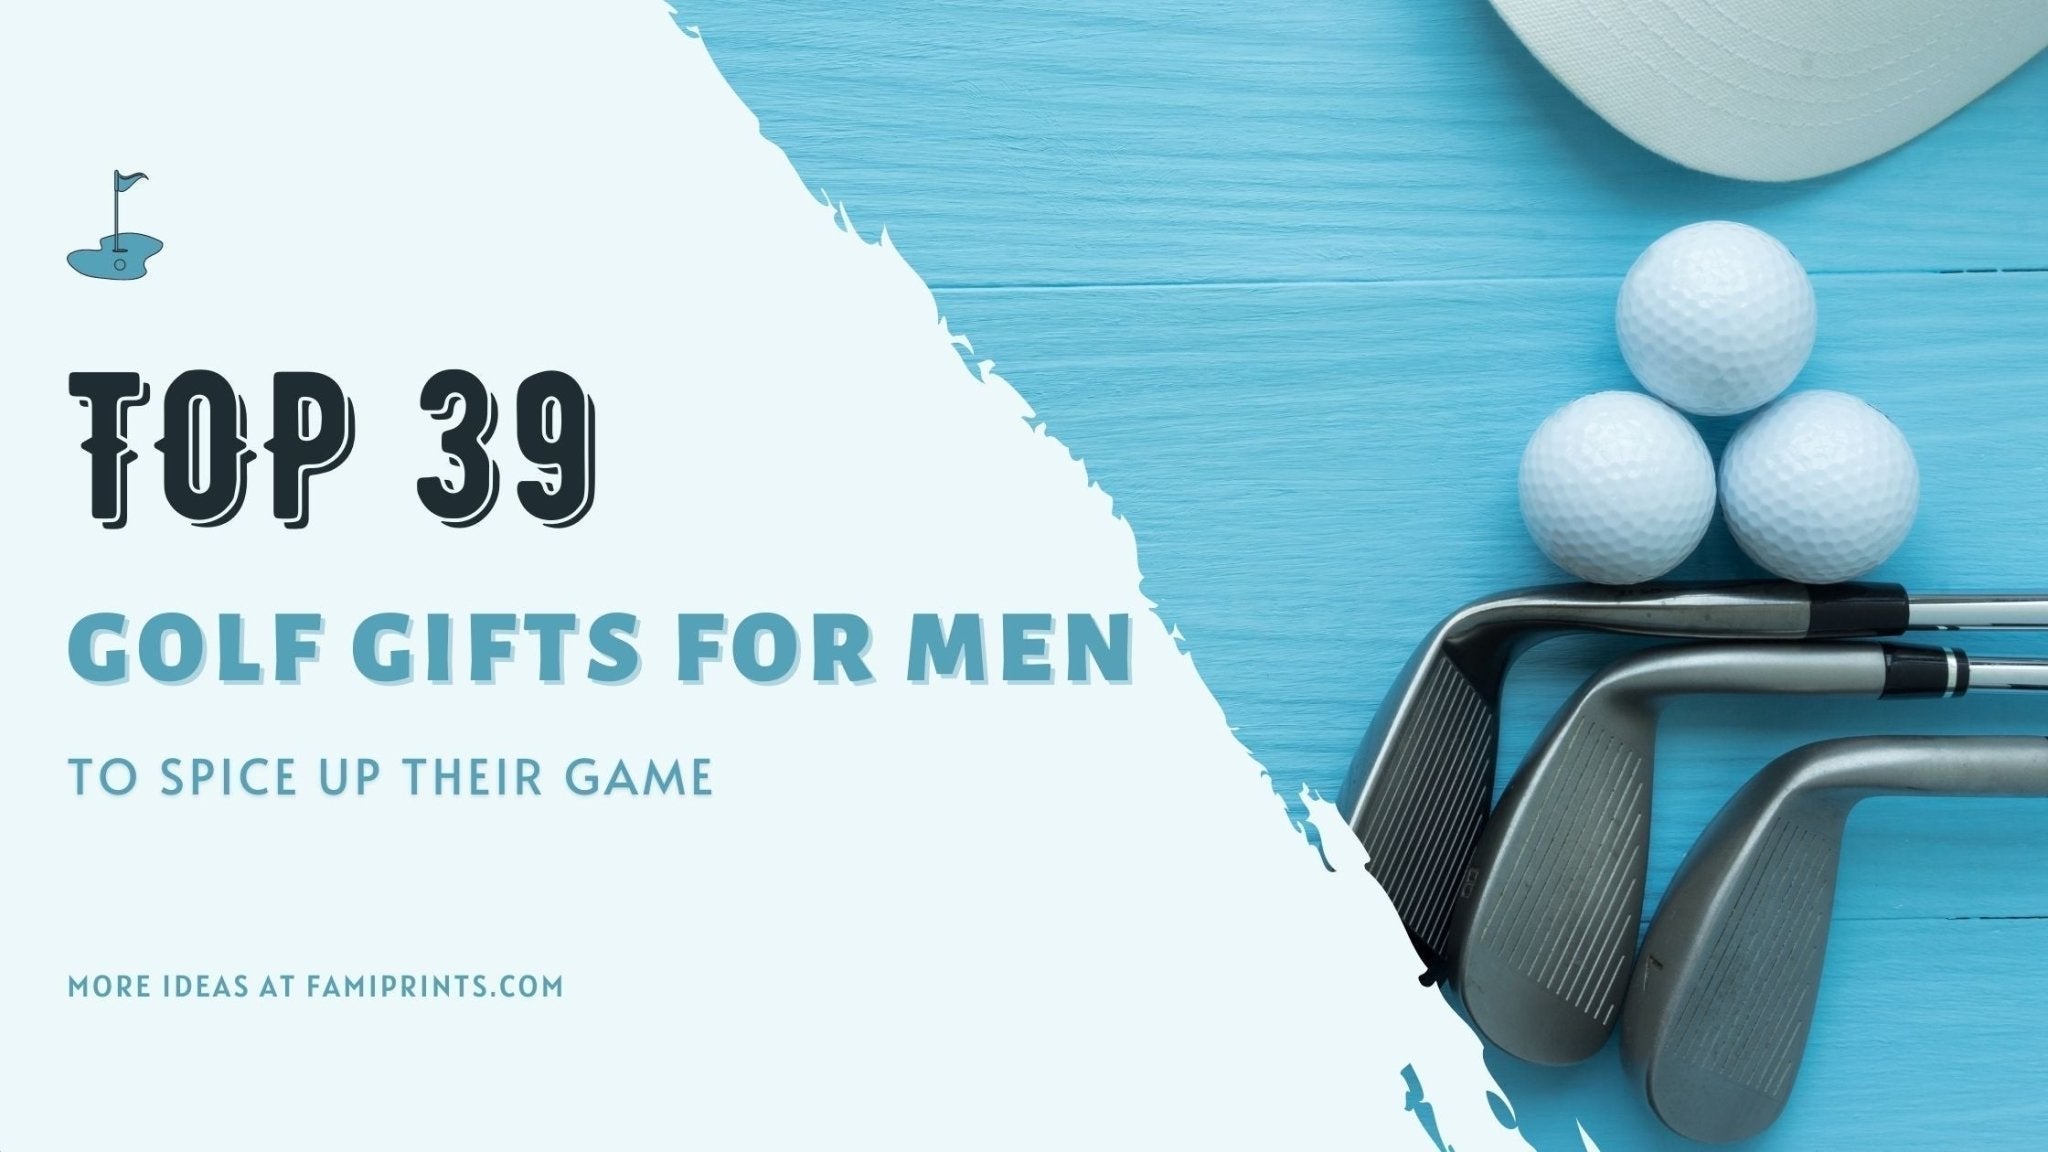 Top 39 Golf Gifts For Men To Spice Up Their Game - FamiPrints | Trending Customizable Family Gifts